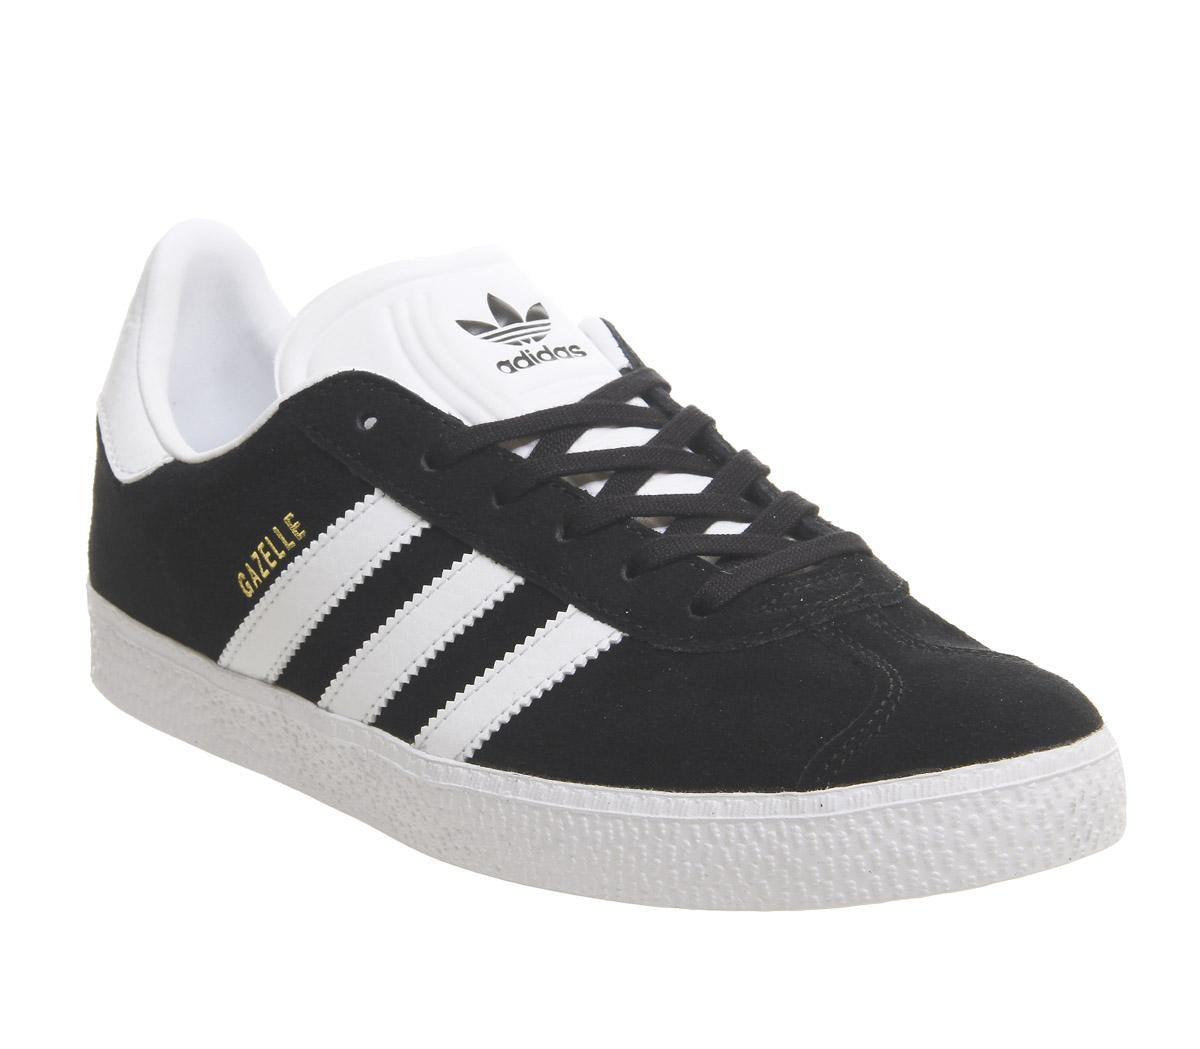 adidas Gazelle Jnr Trainers Core Black - Hers trainers